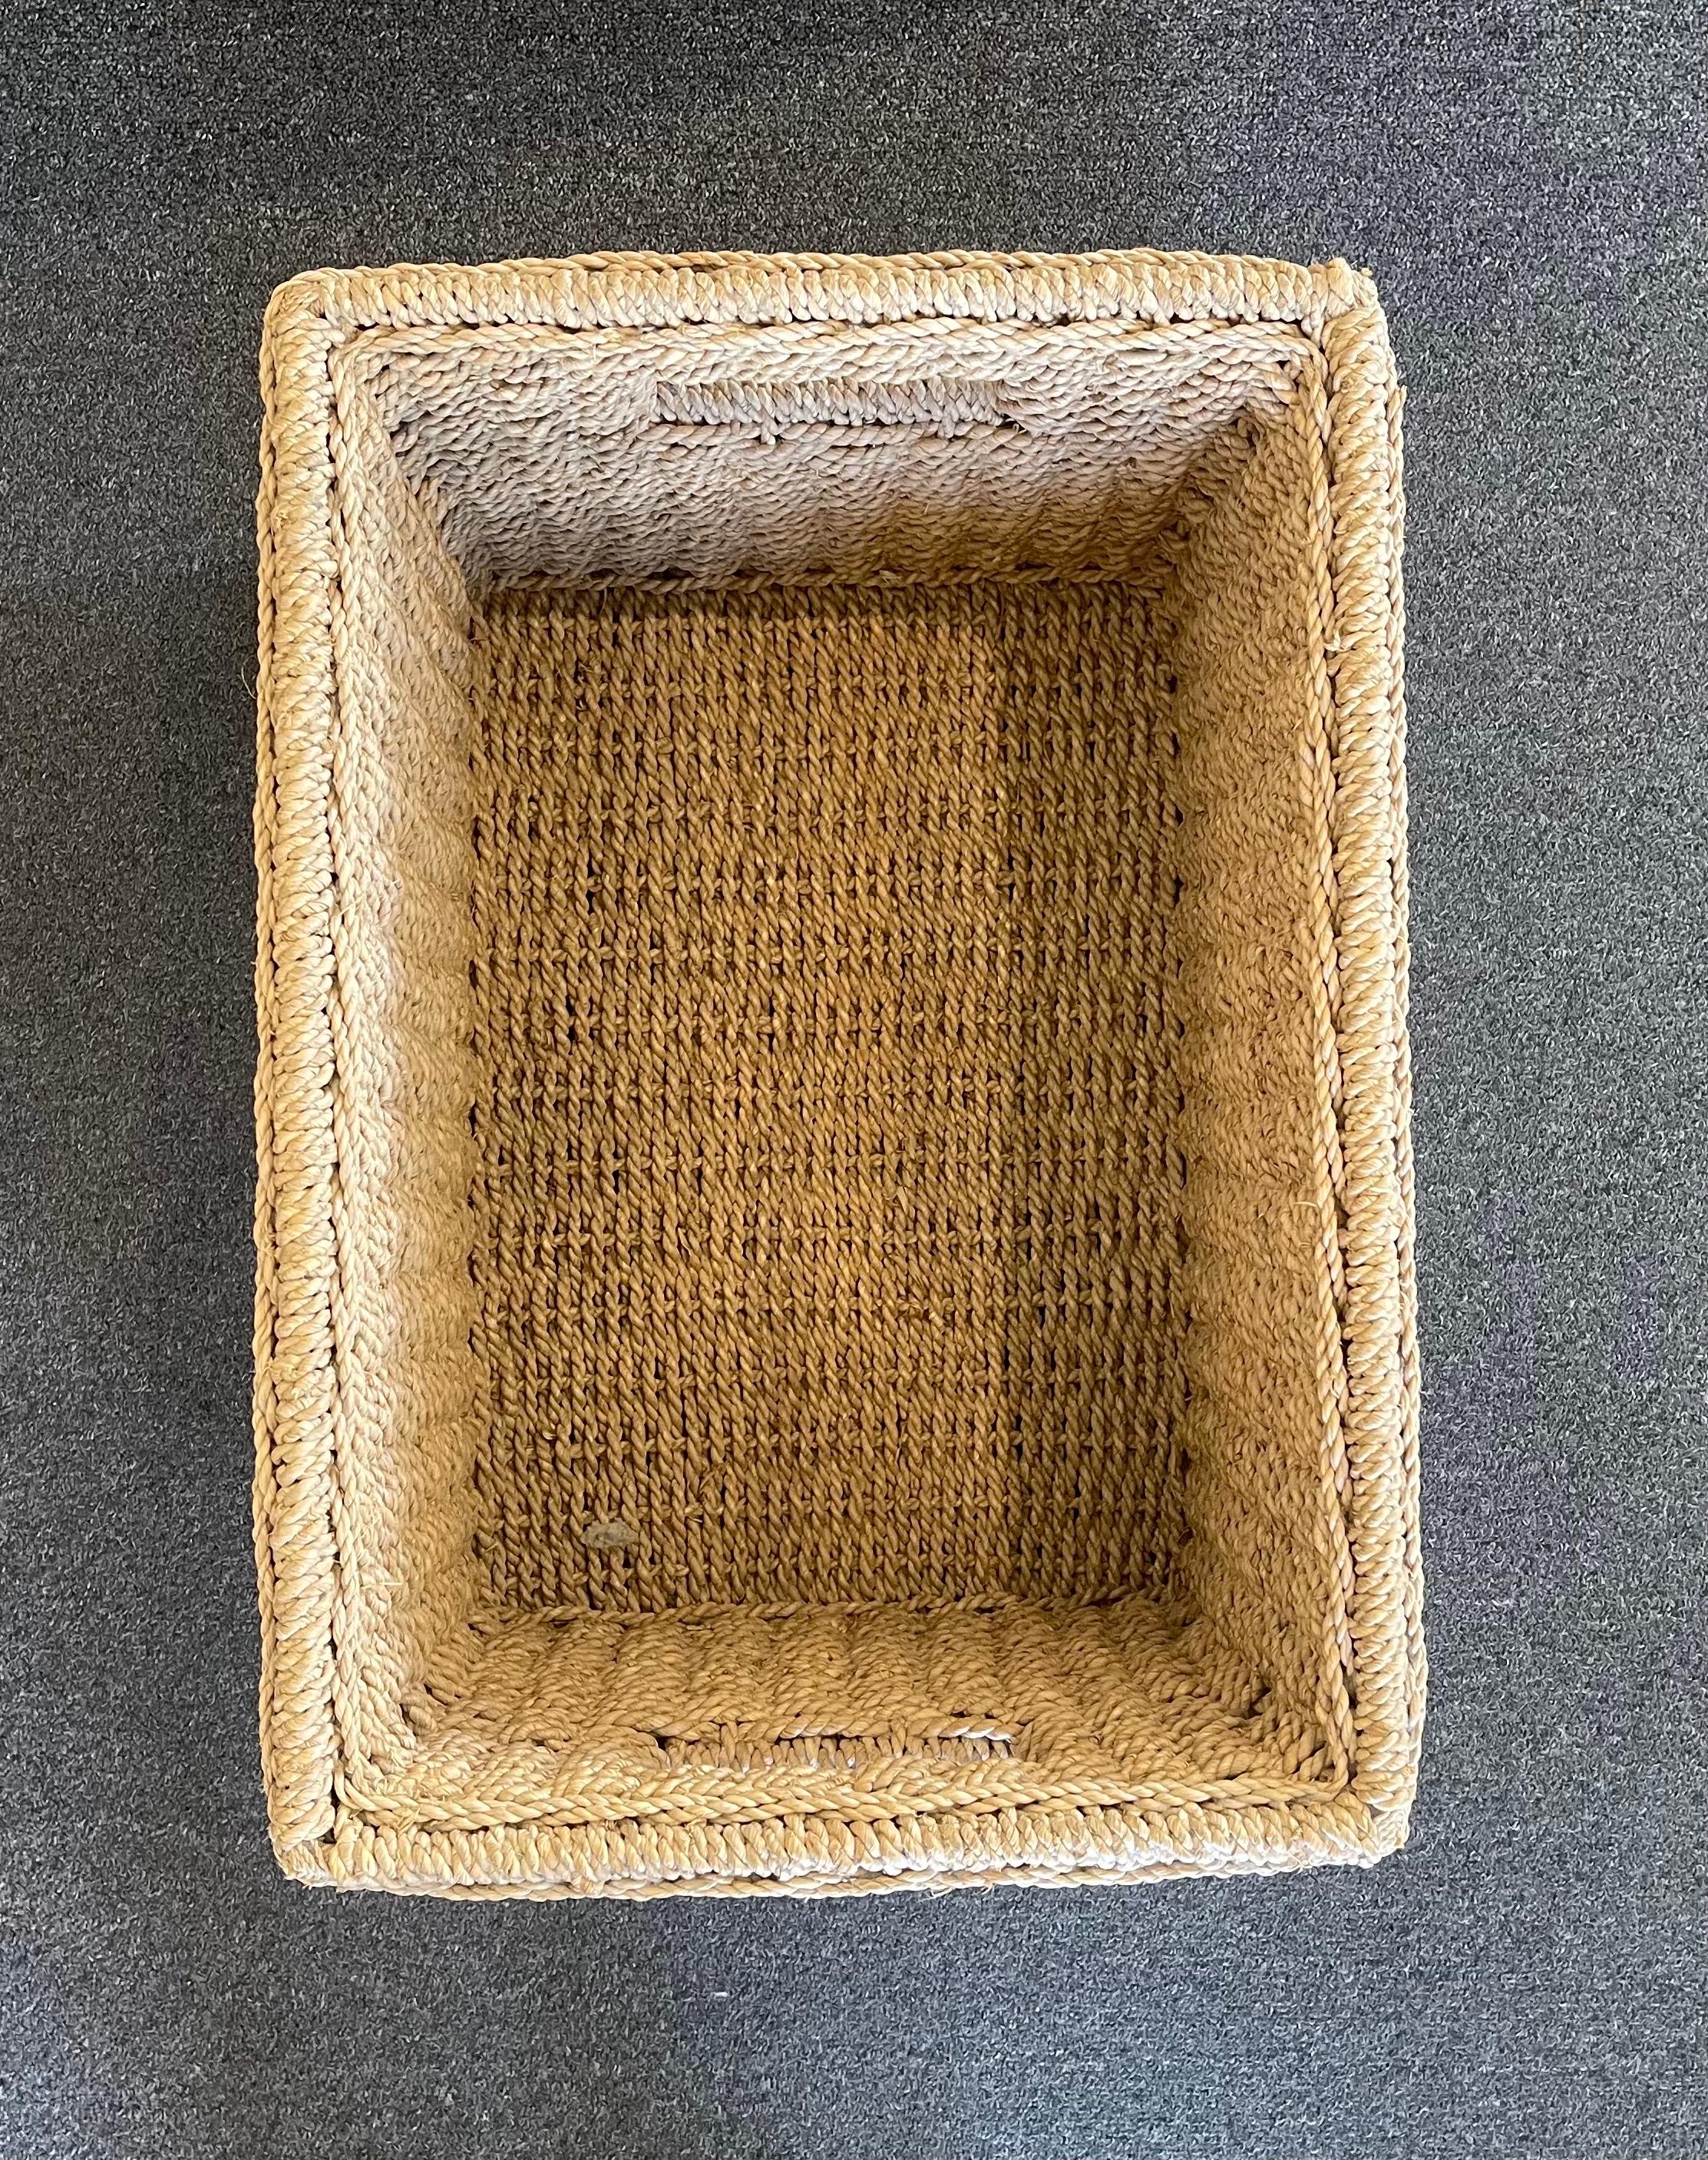 German Hand Woven Rope Basket / Magazine Holder by Gunther Lambert For Sale